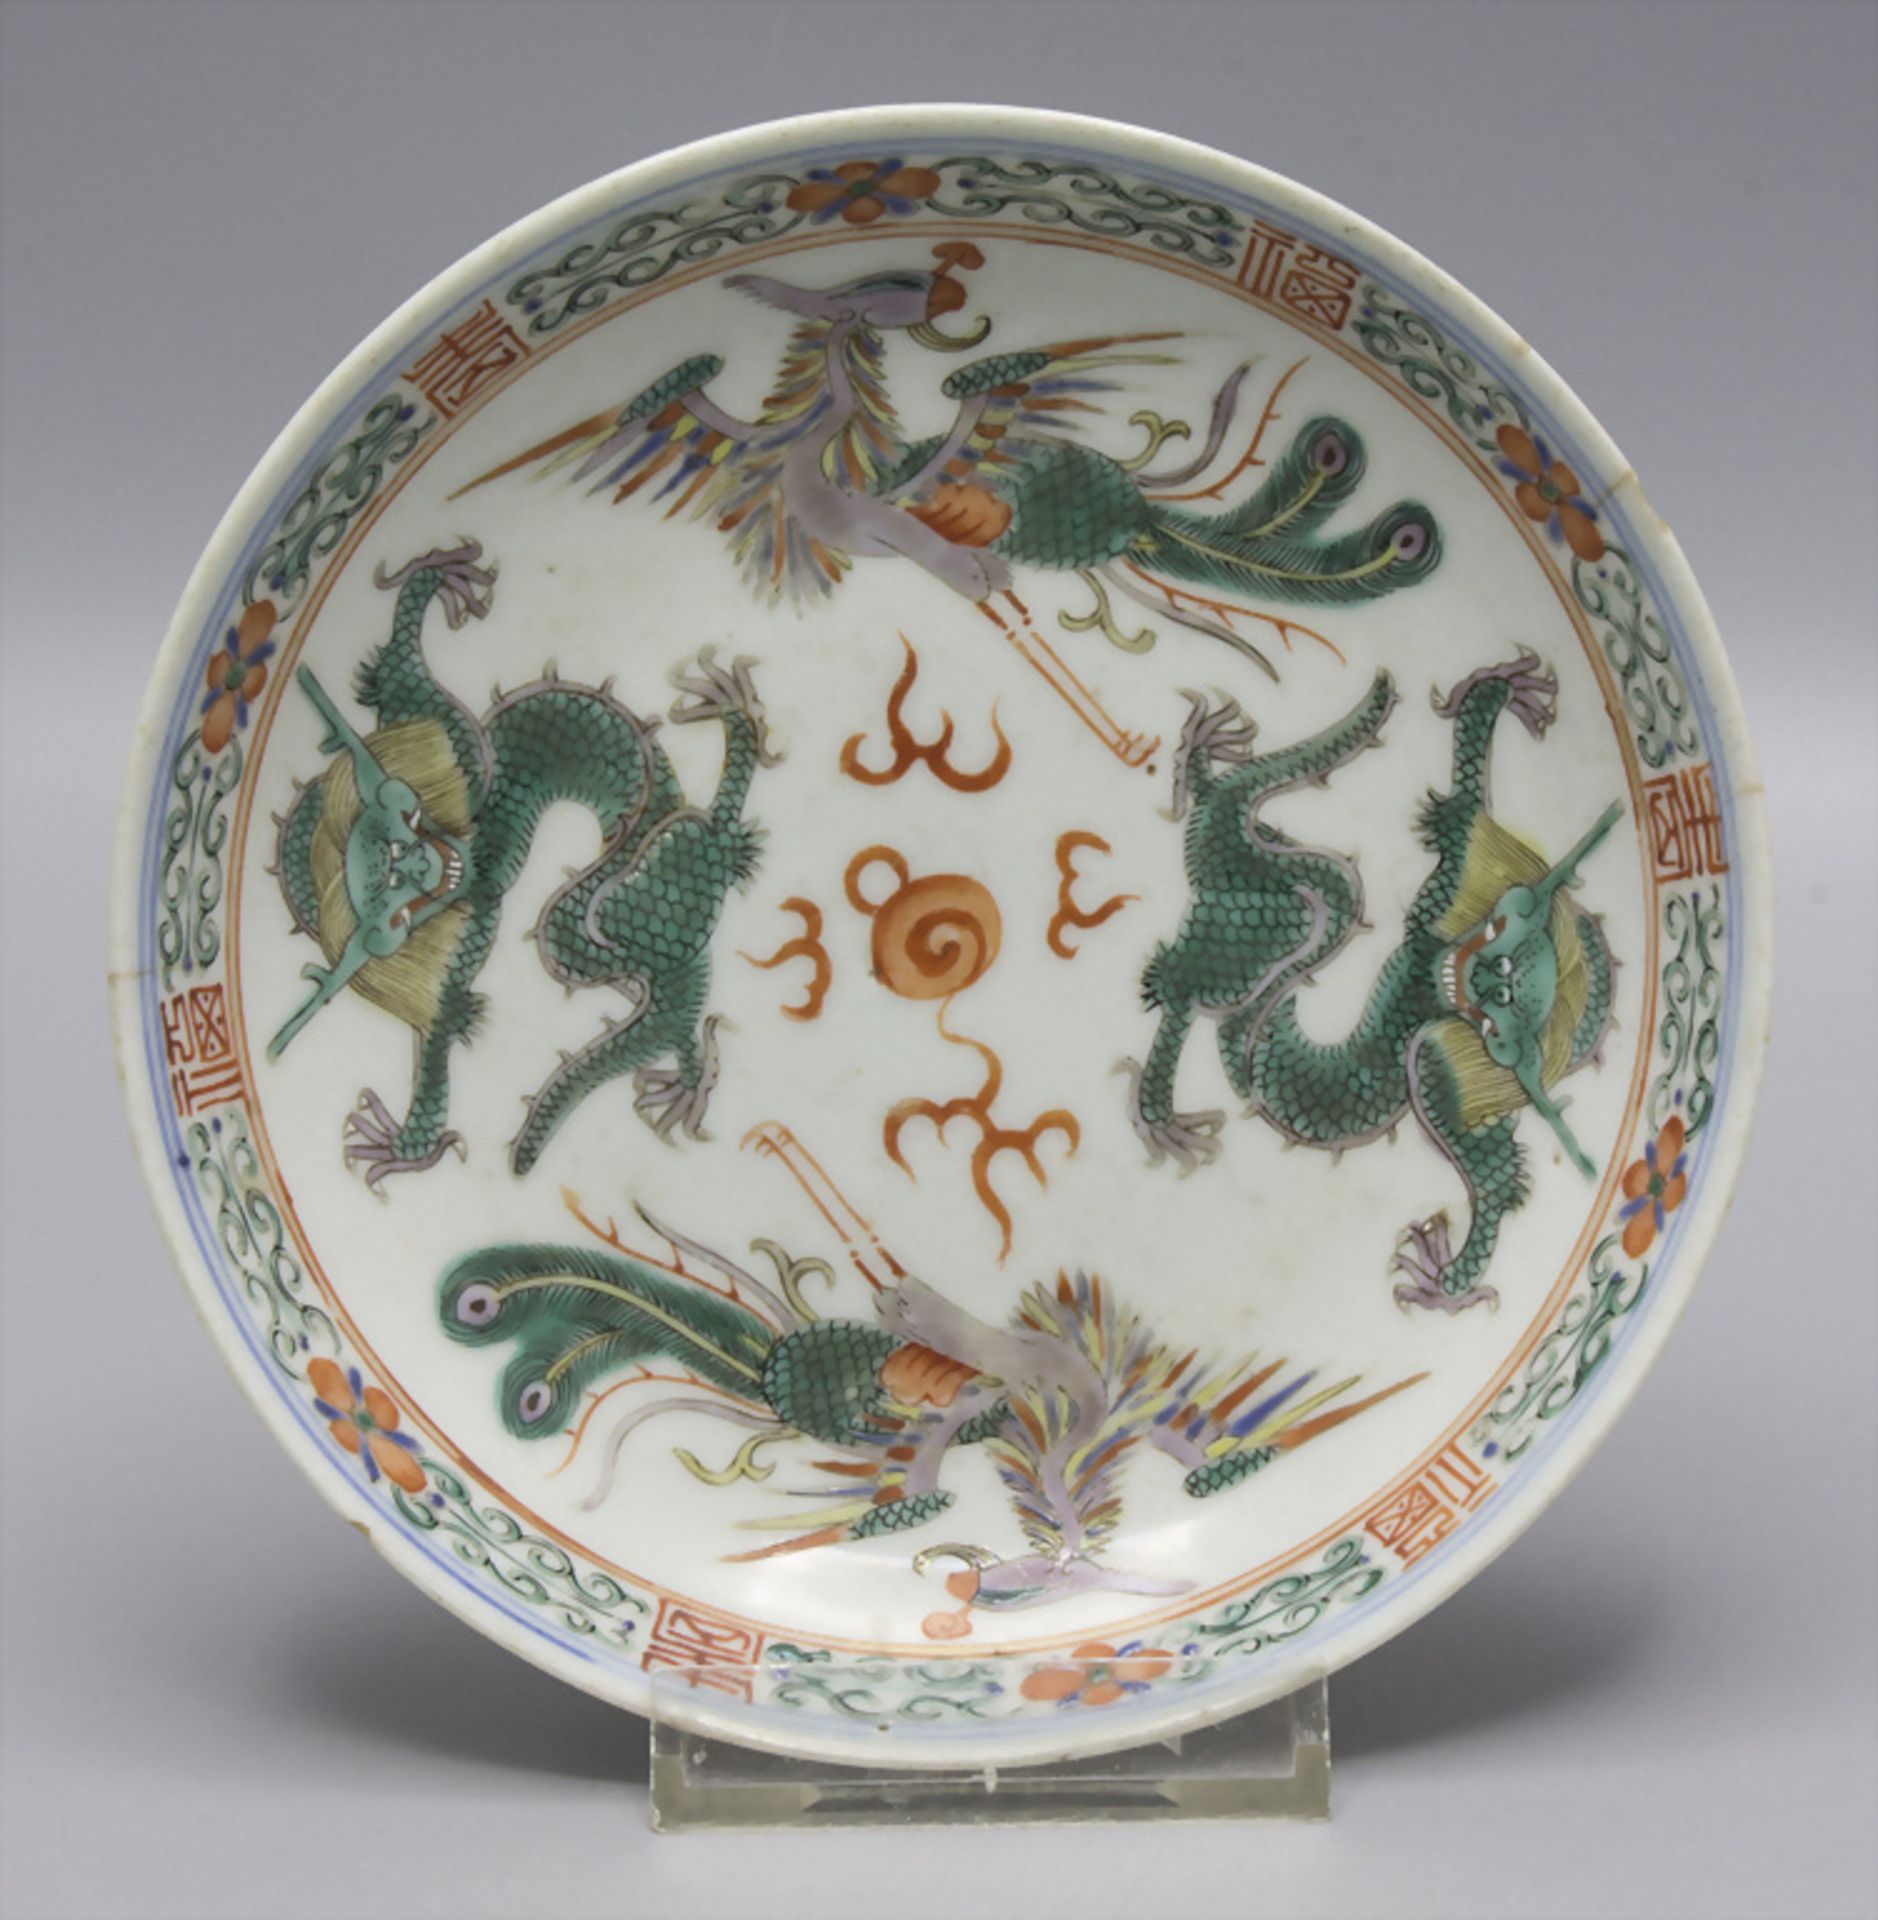 Teller / A plate, China, Qing Dynastie (1644-1911), Chia-ch'ing Periode (1796-1820)